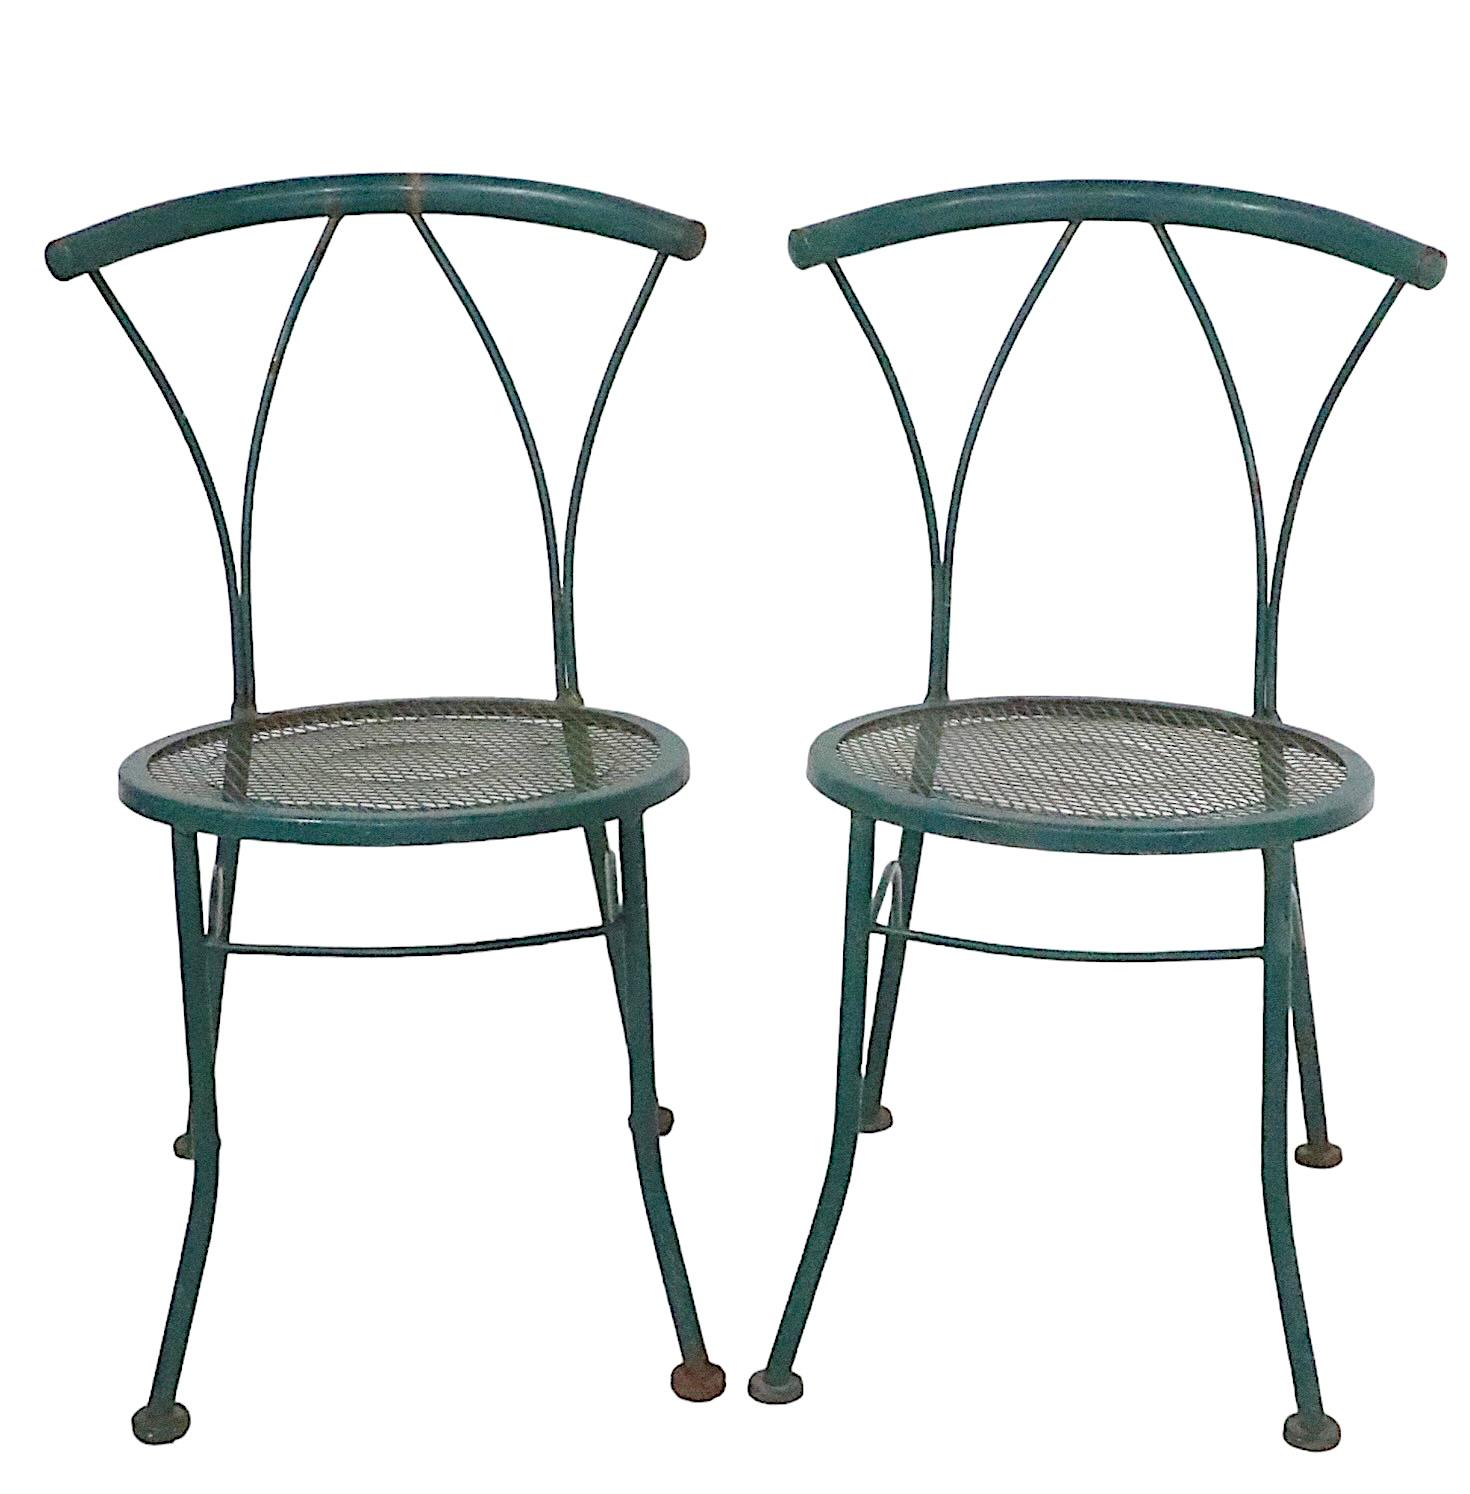 Pr. Wrought Iron and Metal Mesh Garden Patio Poolside Bistro Cafe  Dining Chairs For Sale 3